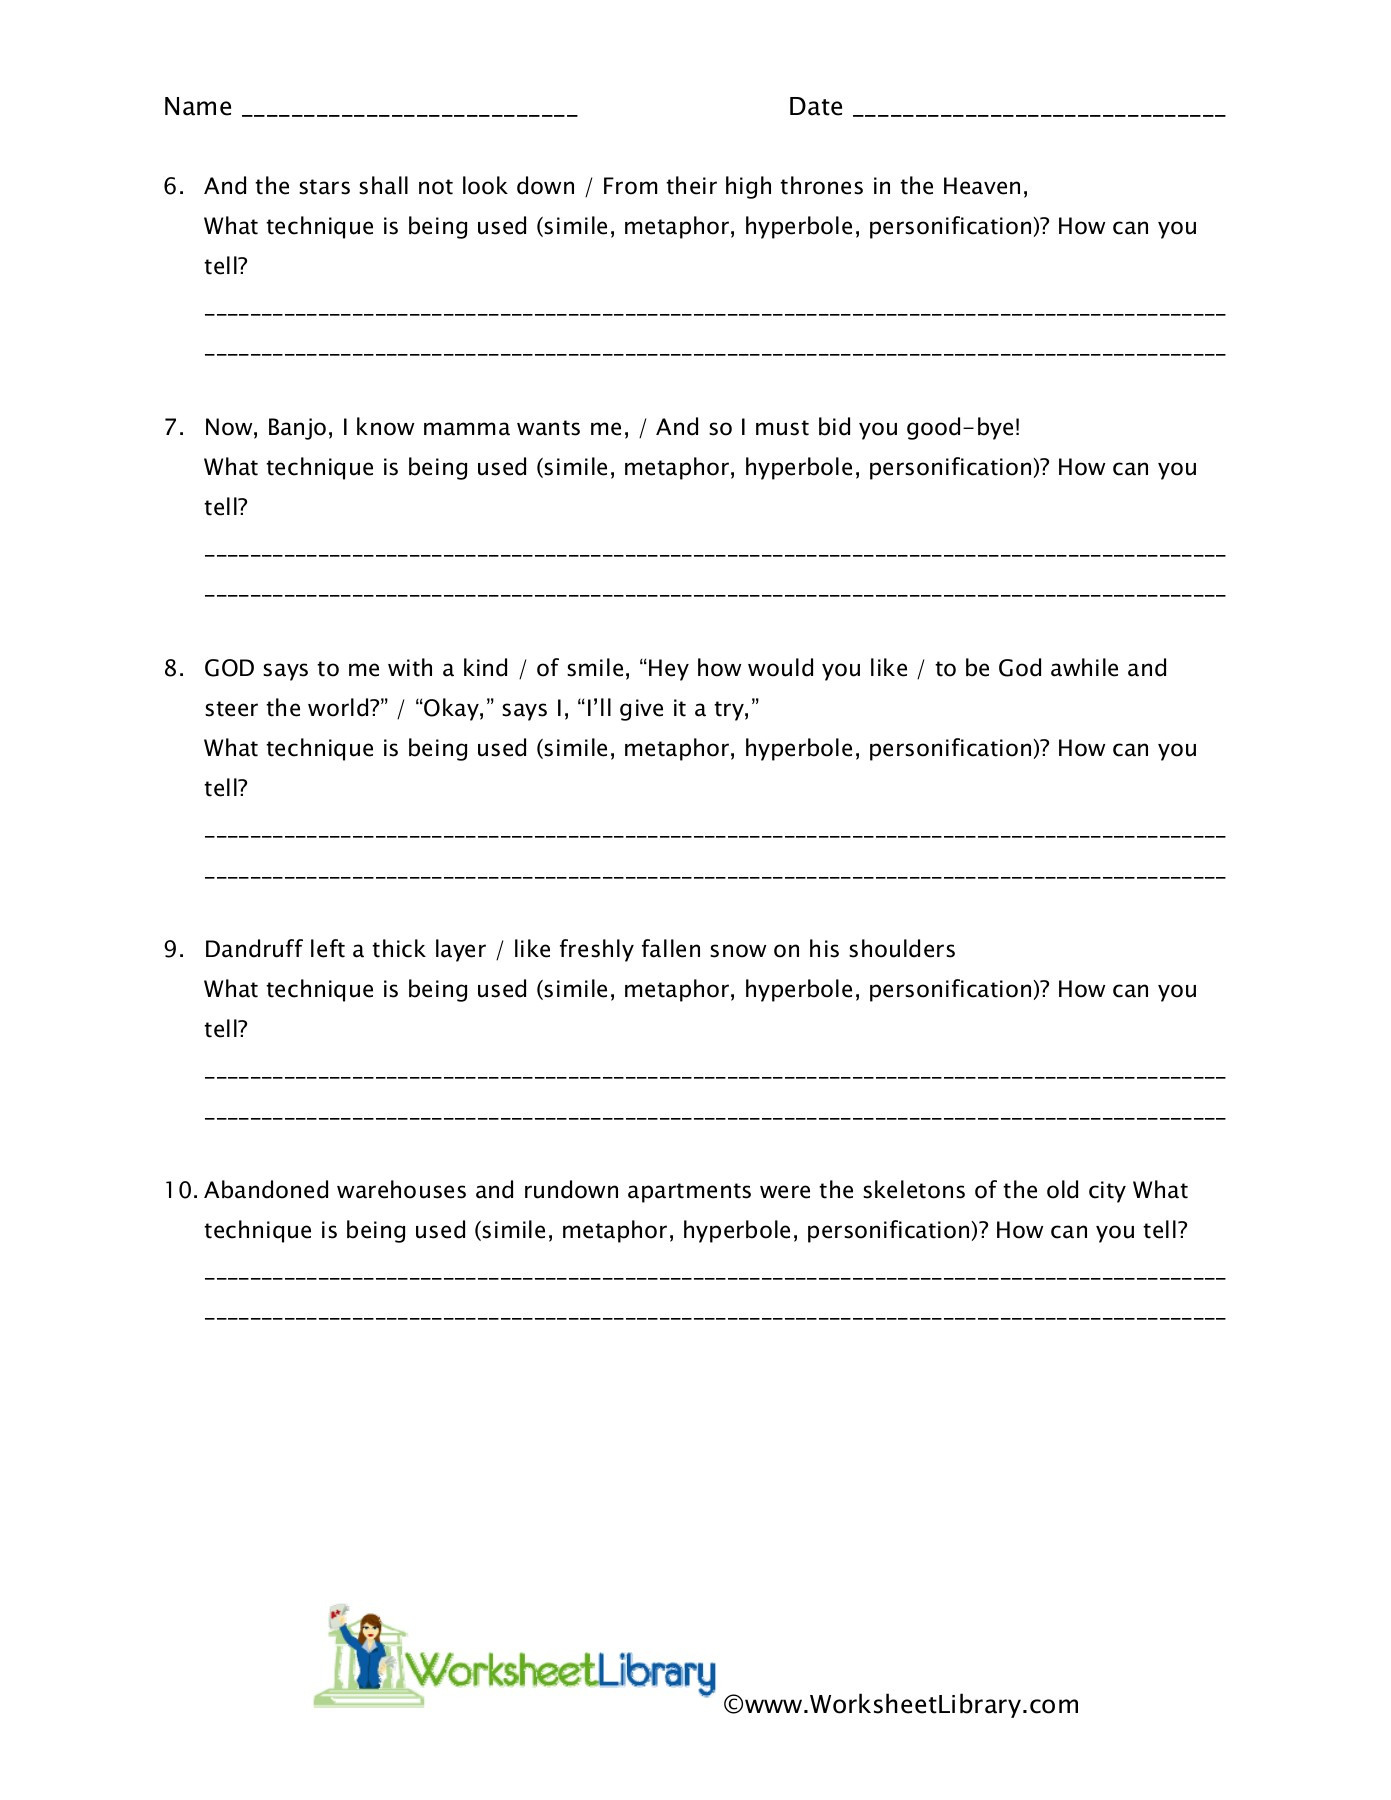 Identifying Figurative Language Worksheet 1 Pages 1 3 Db excel